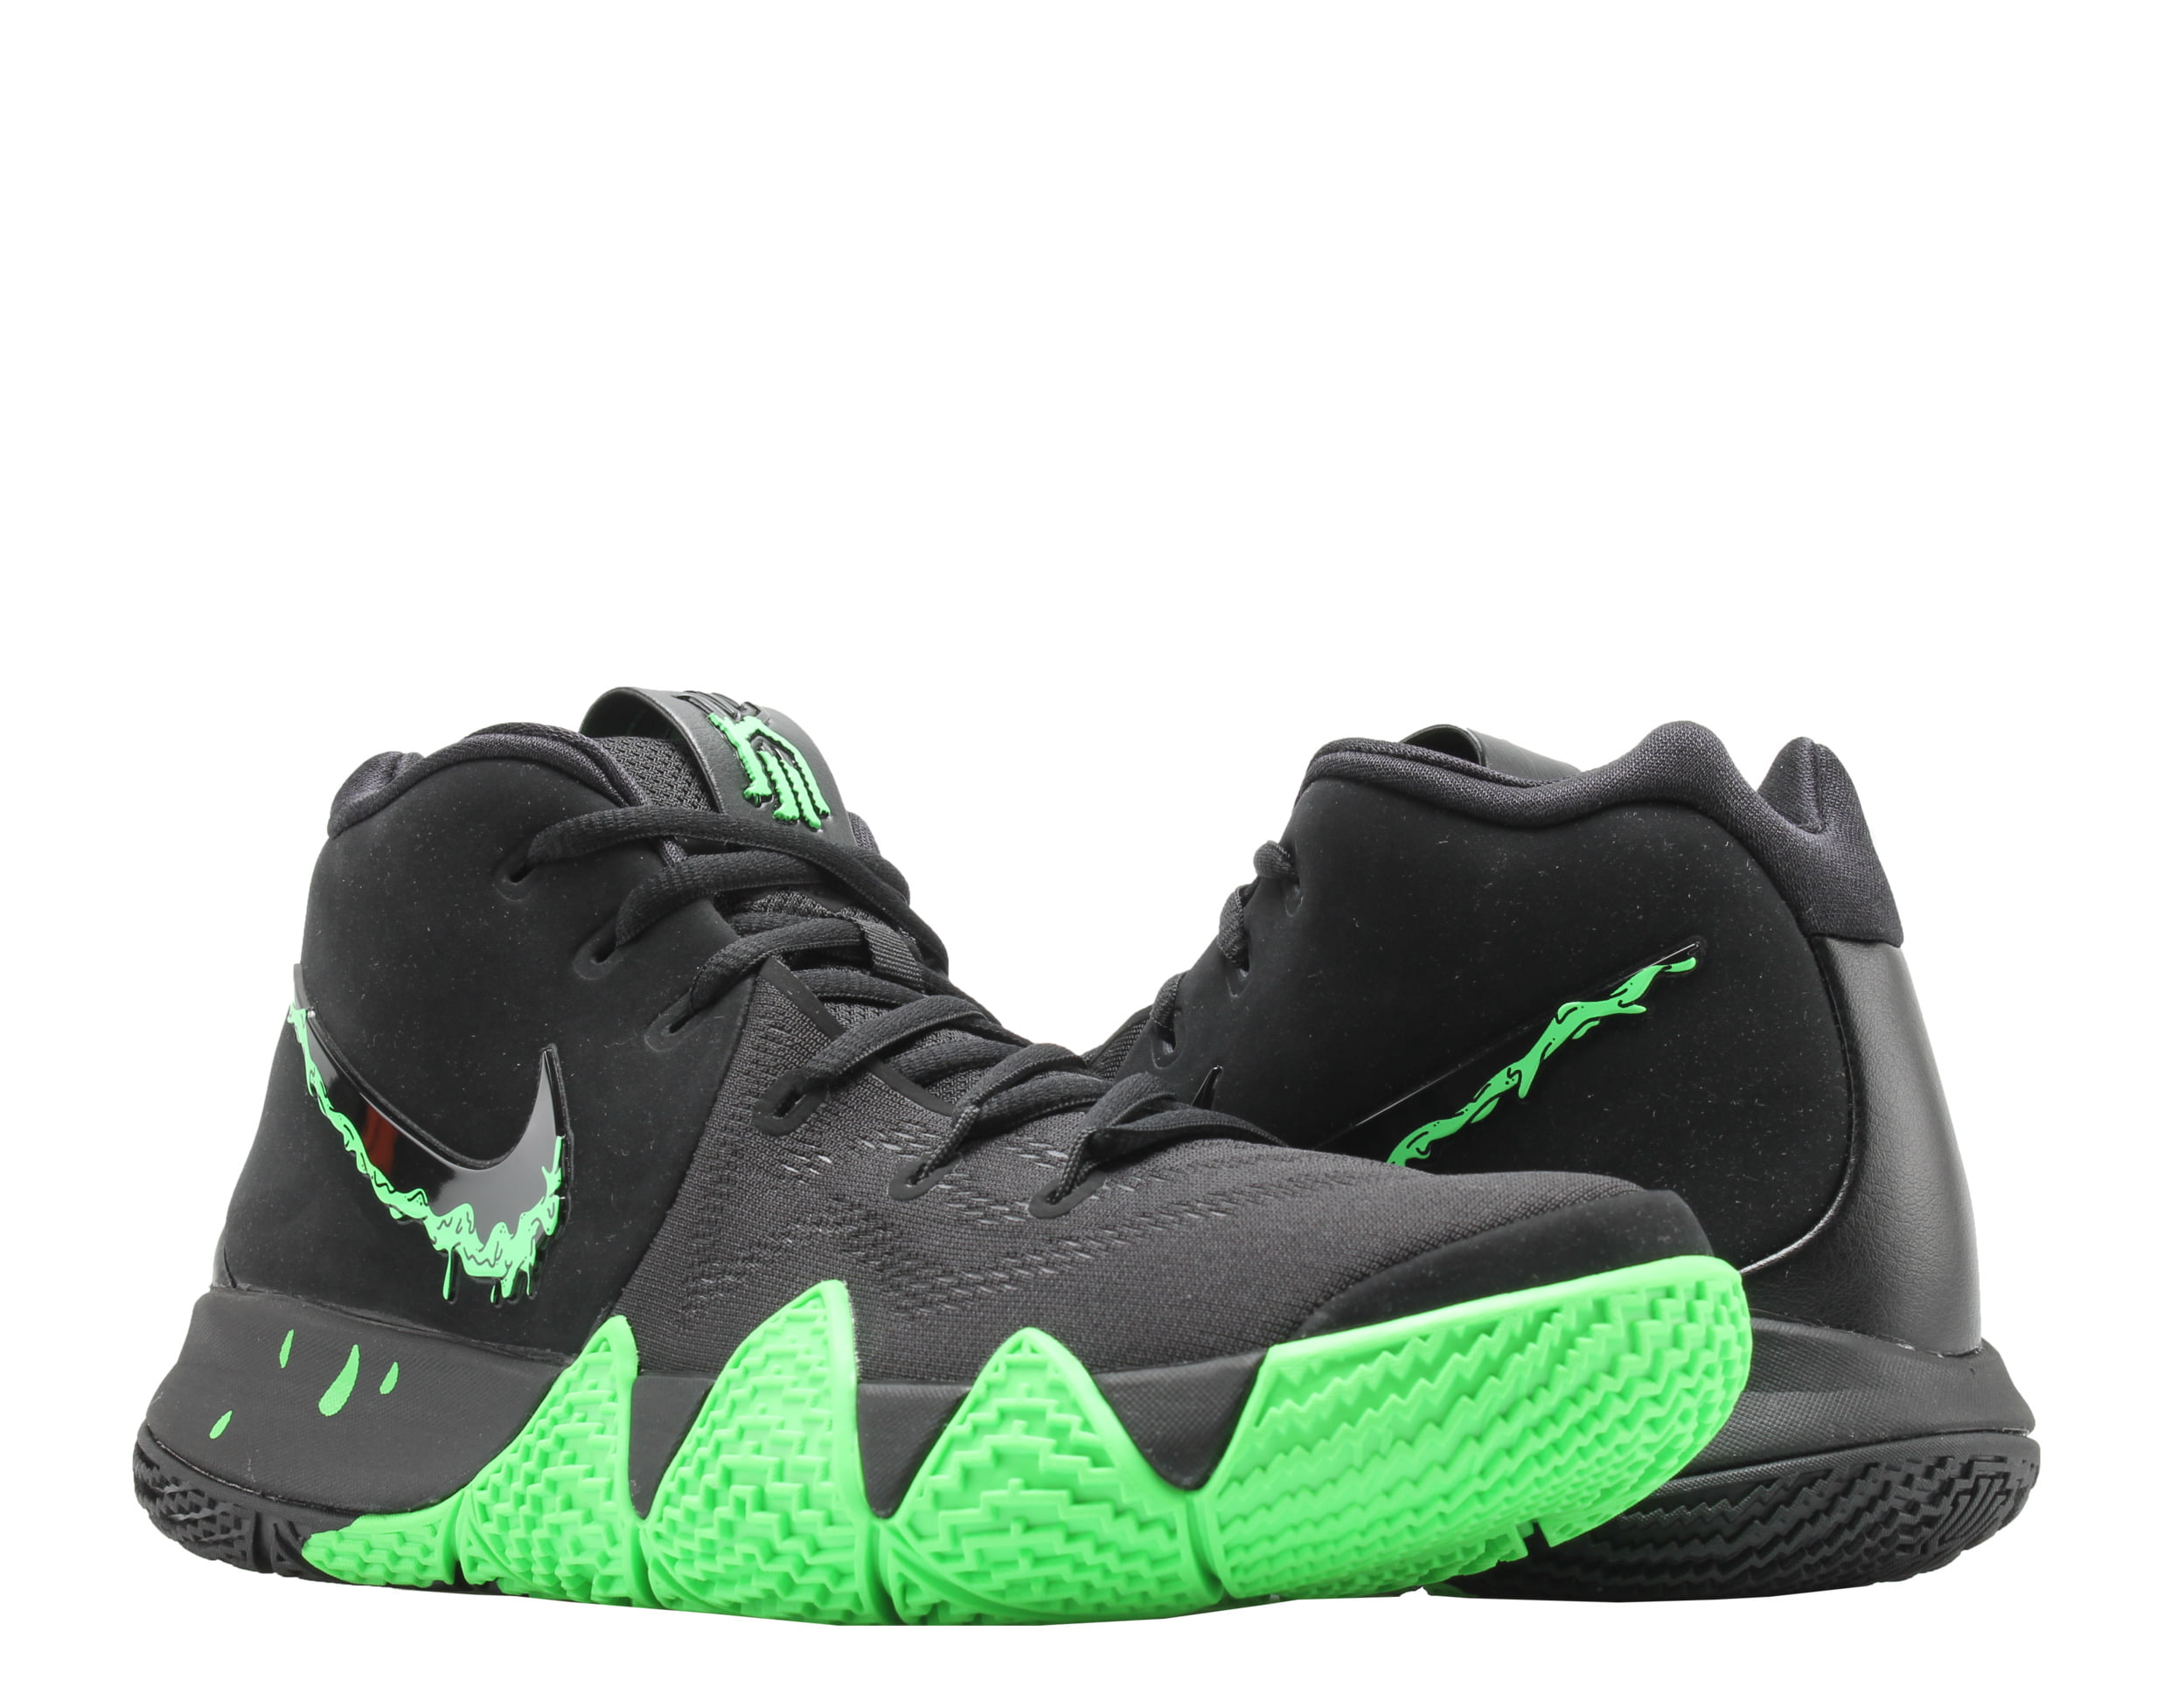 kyrie shoes halloween